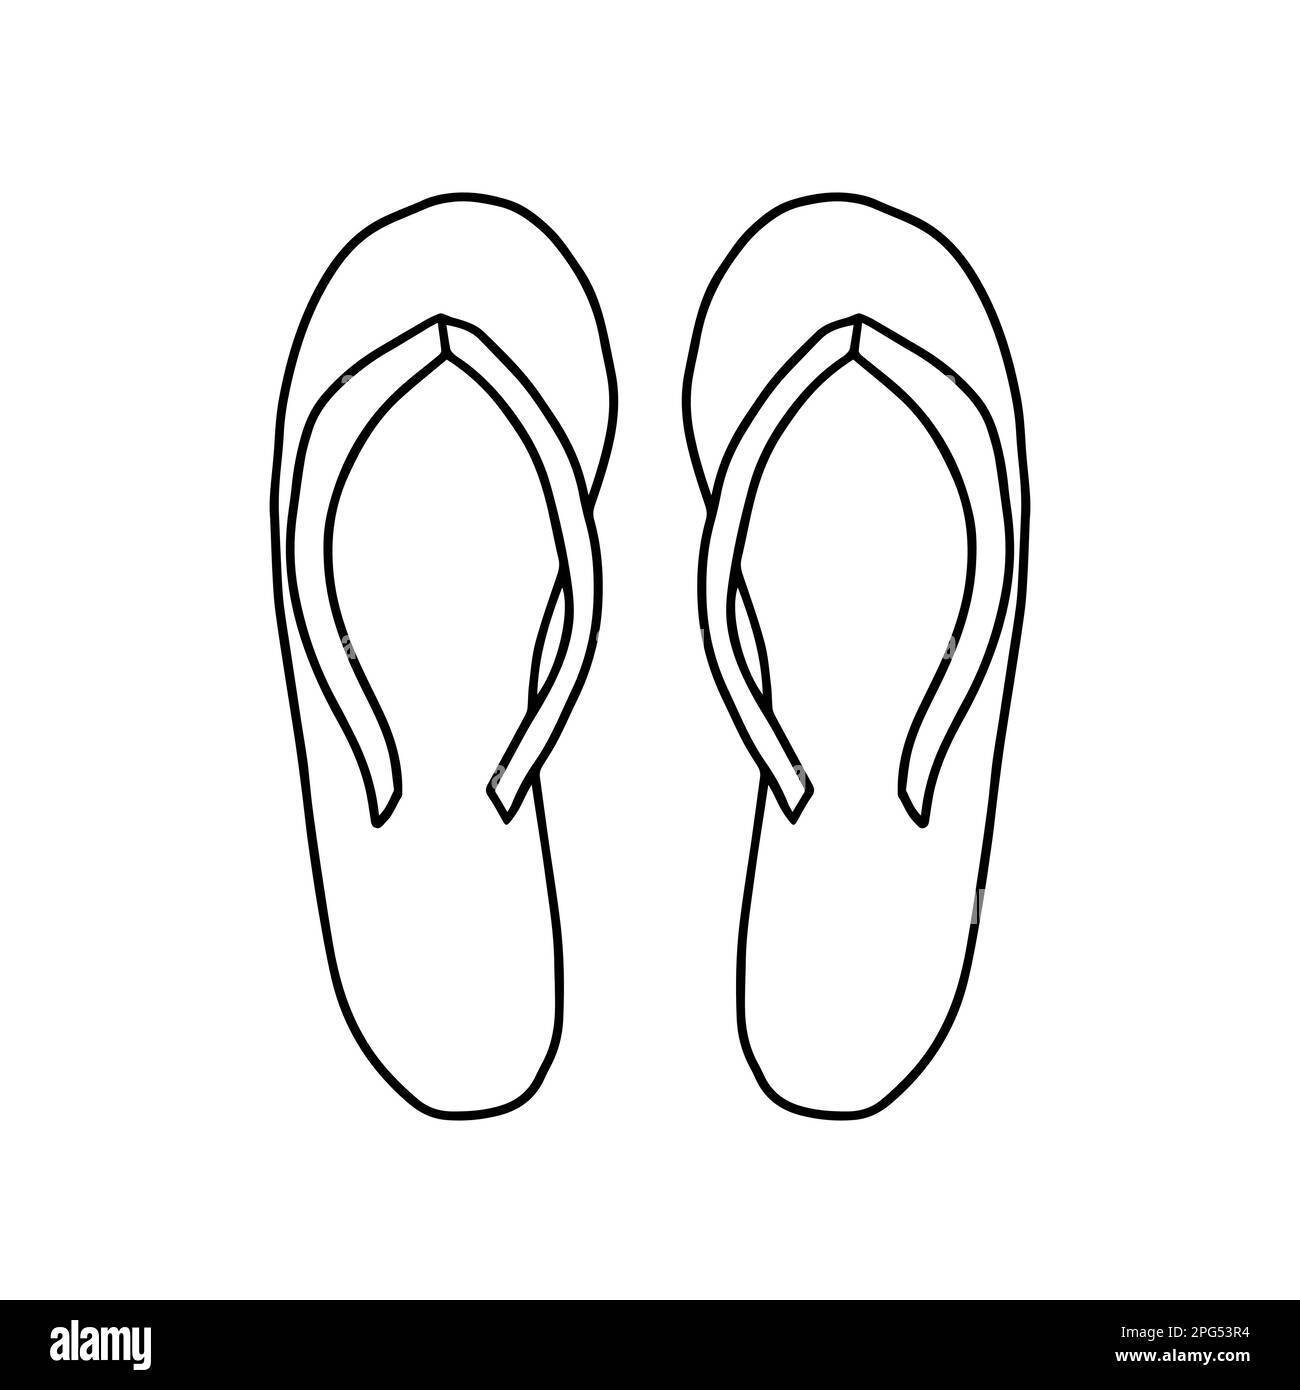 Rubber slippers Black and White Stock Photos & Images - Alamy